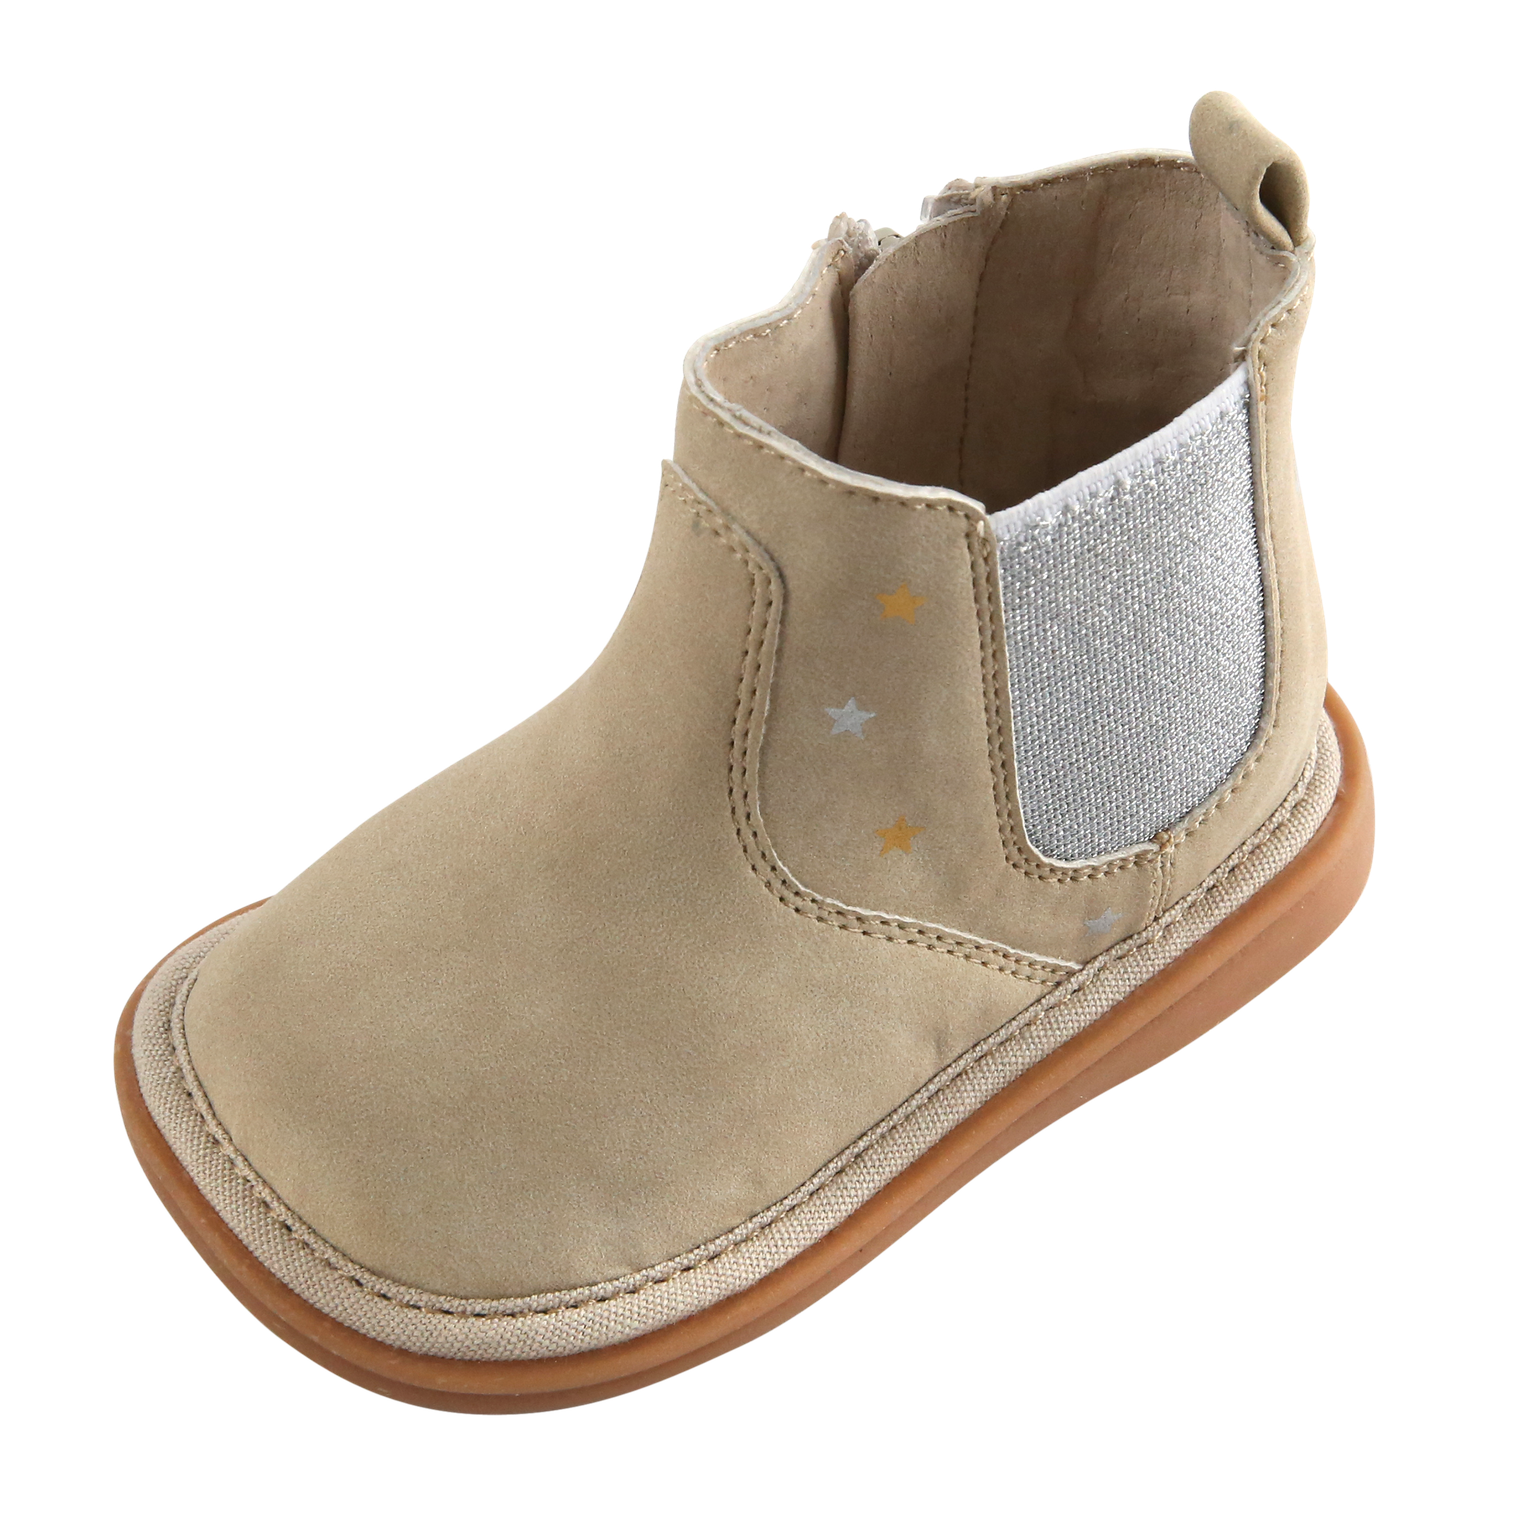 Bella Sparkle Boot | Toddler Squeaky Shoes | mooshu TRAINERS | The Dazzle Stars on this Bella toddler girls boot is a playful twist adding personality. This shoe is appropriate from the playground to the classroom. 